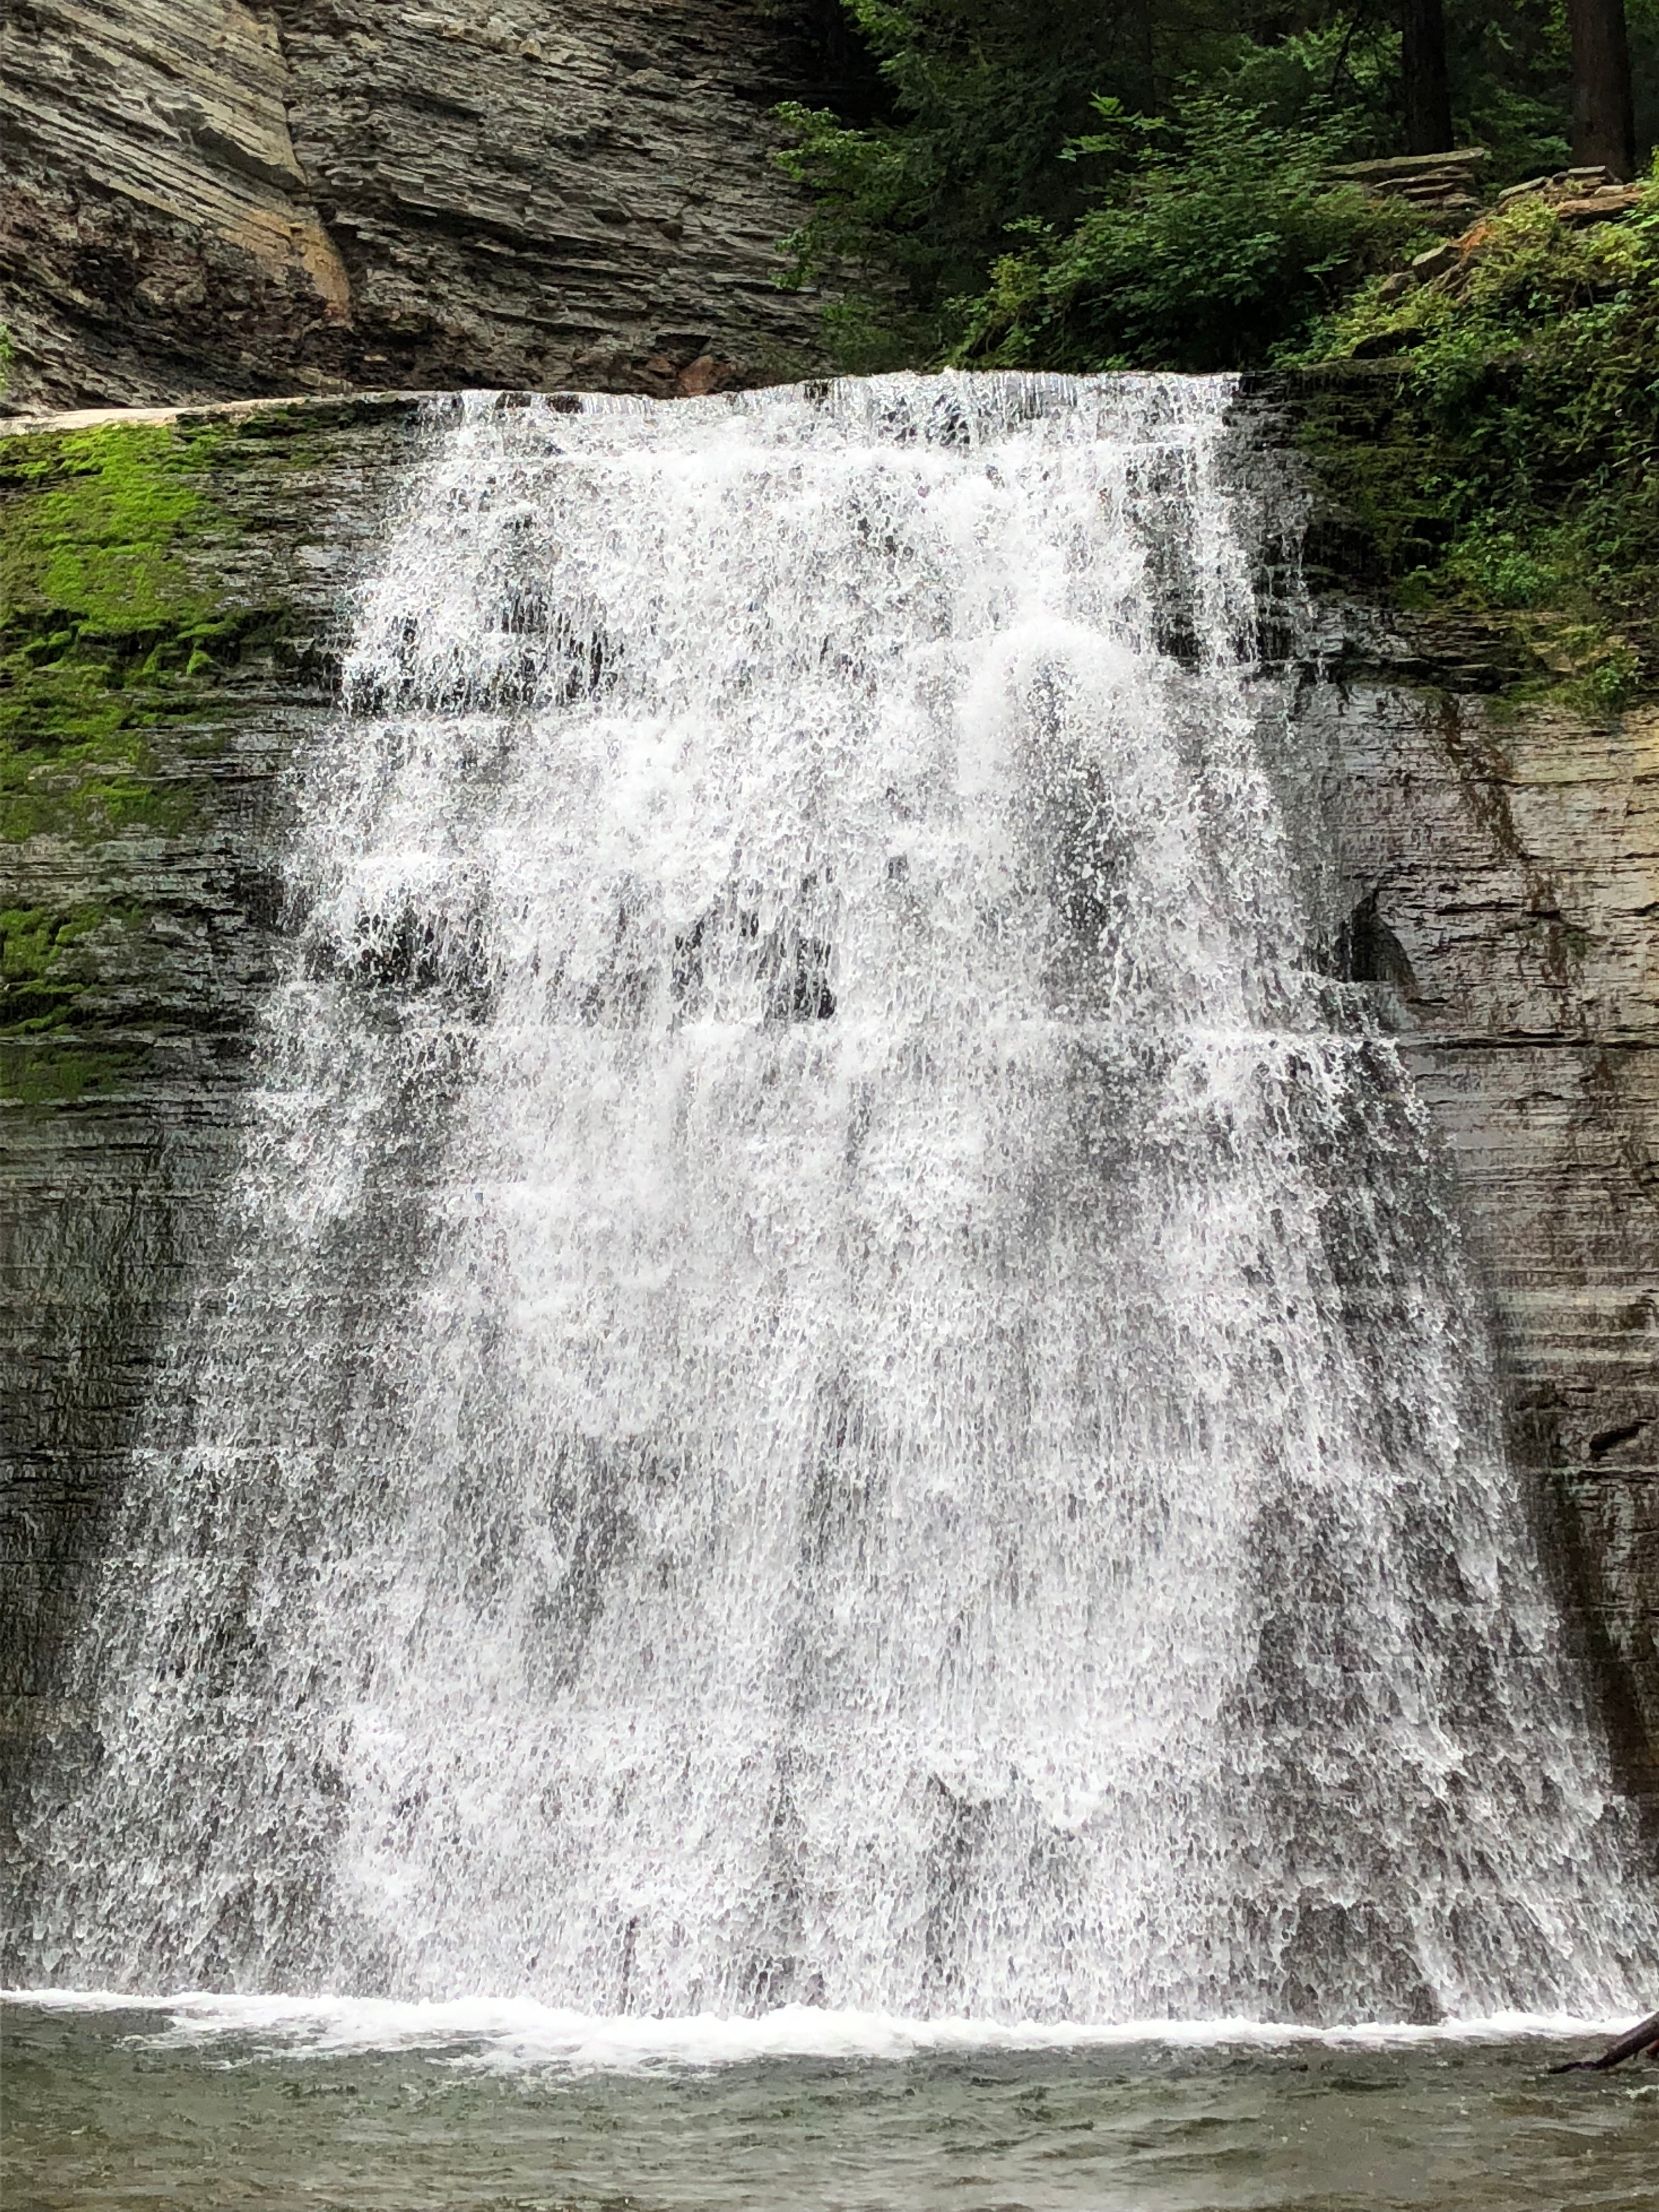 One of several waterfalls on the gorge trail. 